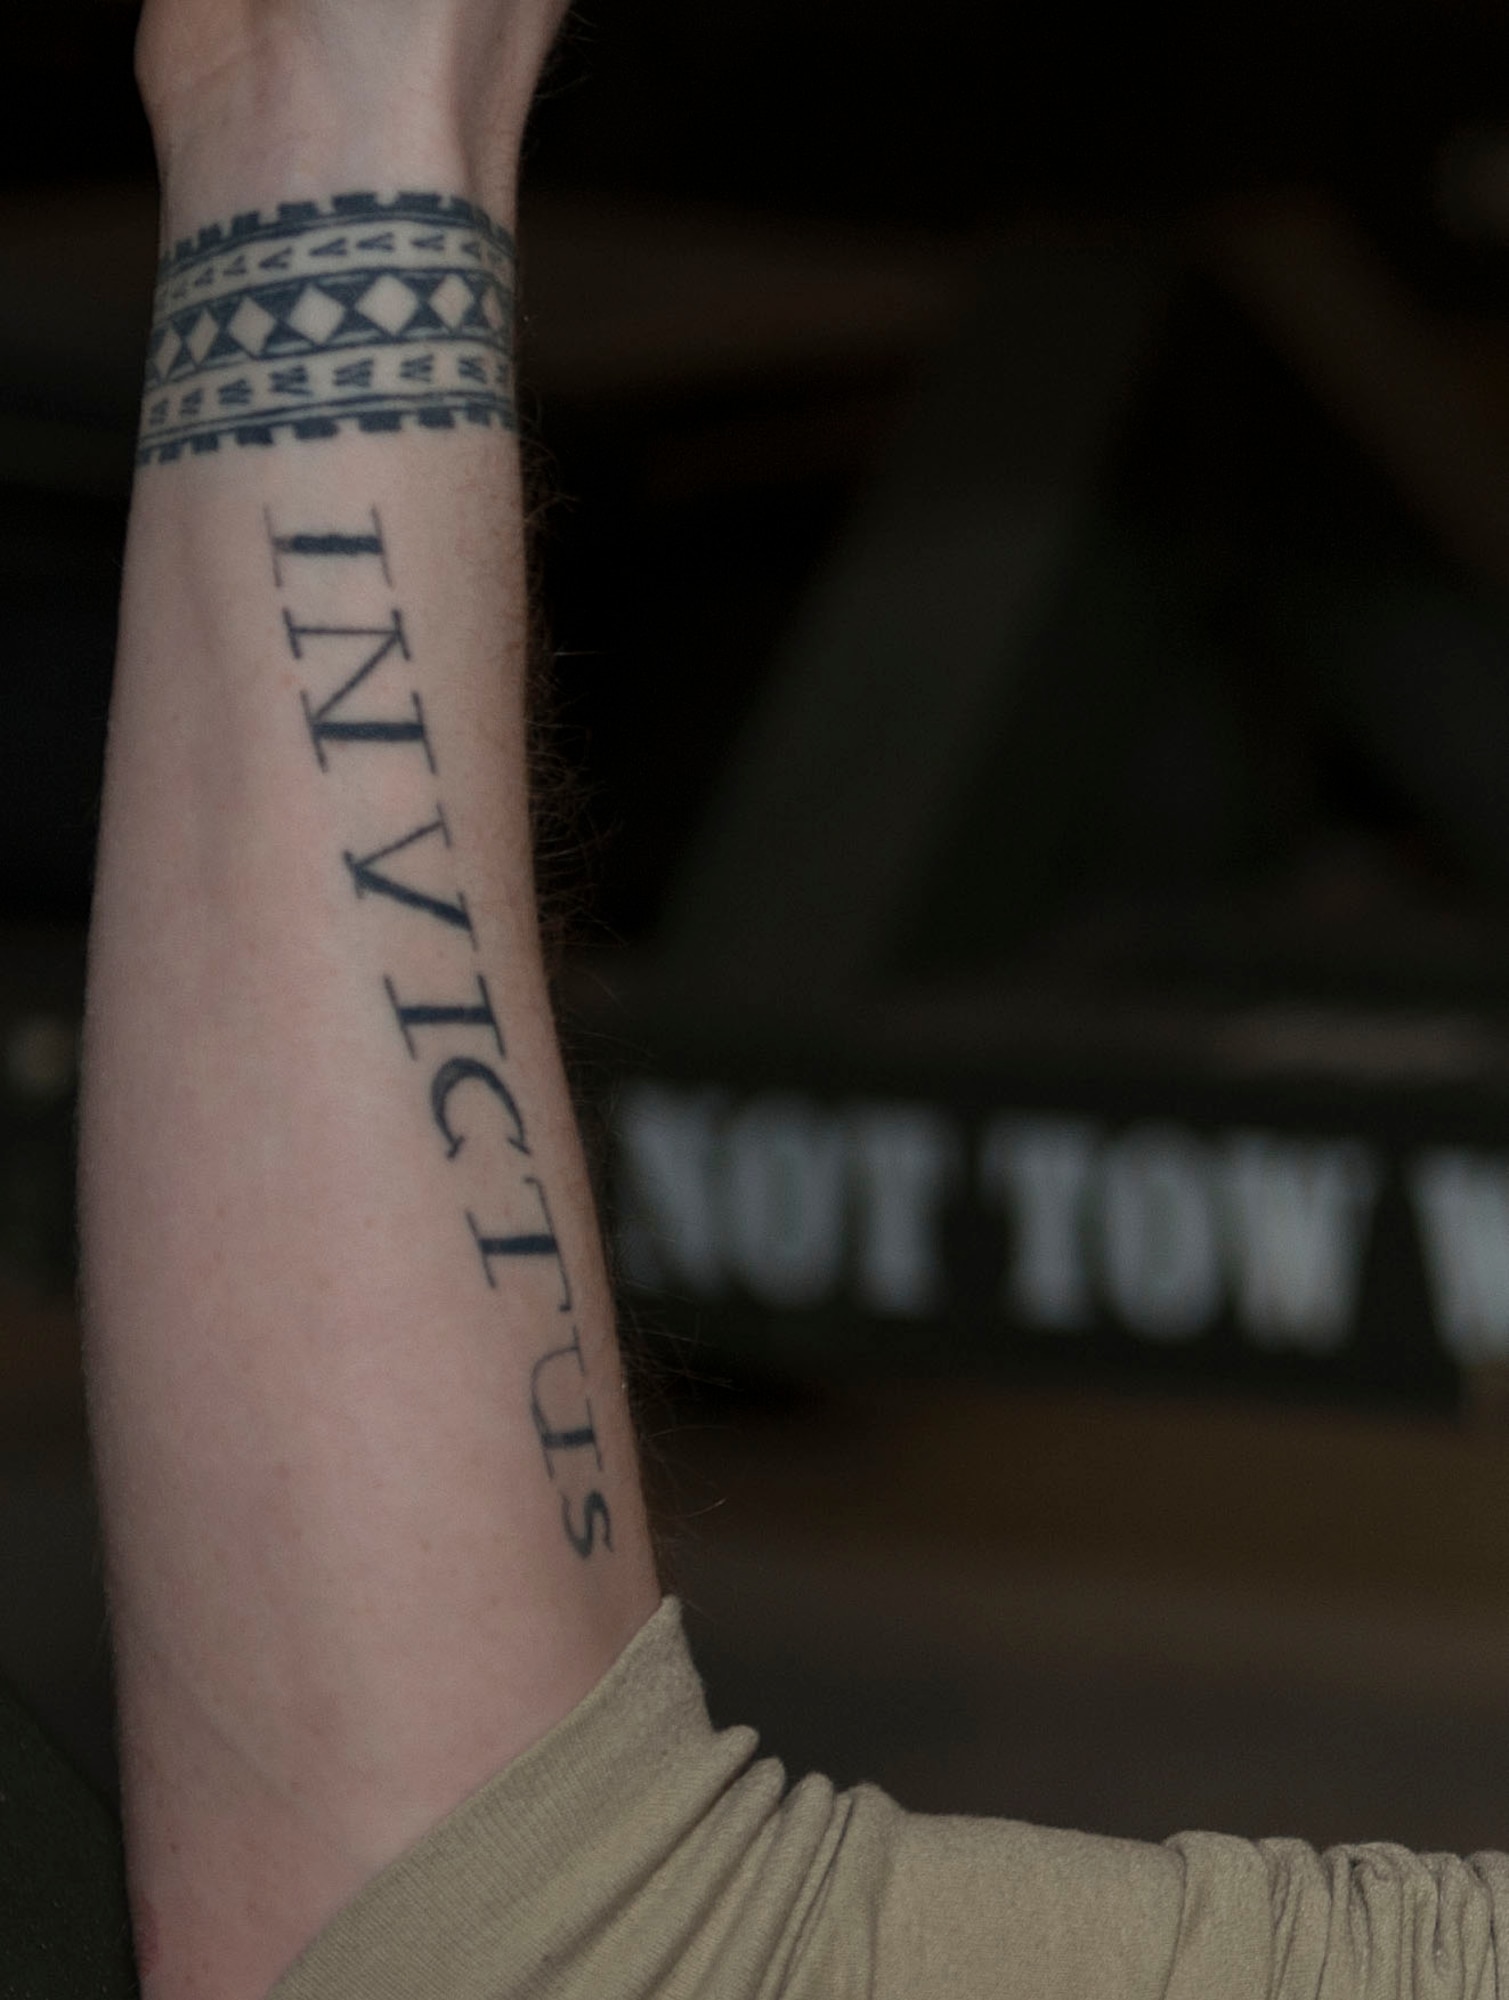 U.S. Air Force Senior Airman Daniel Brewer, 7th Munitions Squadron armament maintenance technician, shows off two of his five tattoos at Dyess Air Force Base, Texas, Jan. 6, 2016. Brewer has gotten one tattoo each year since the age of 16. (U.S. Air Force photo by Airman 1st Class April Lancto)

